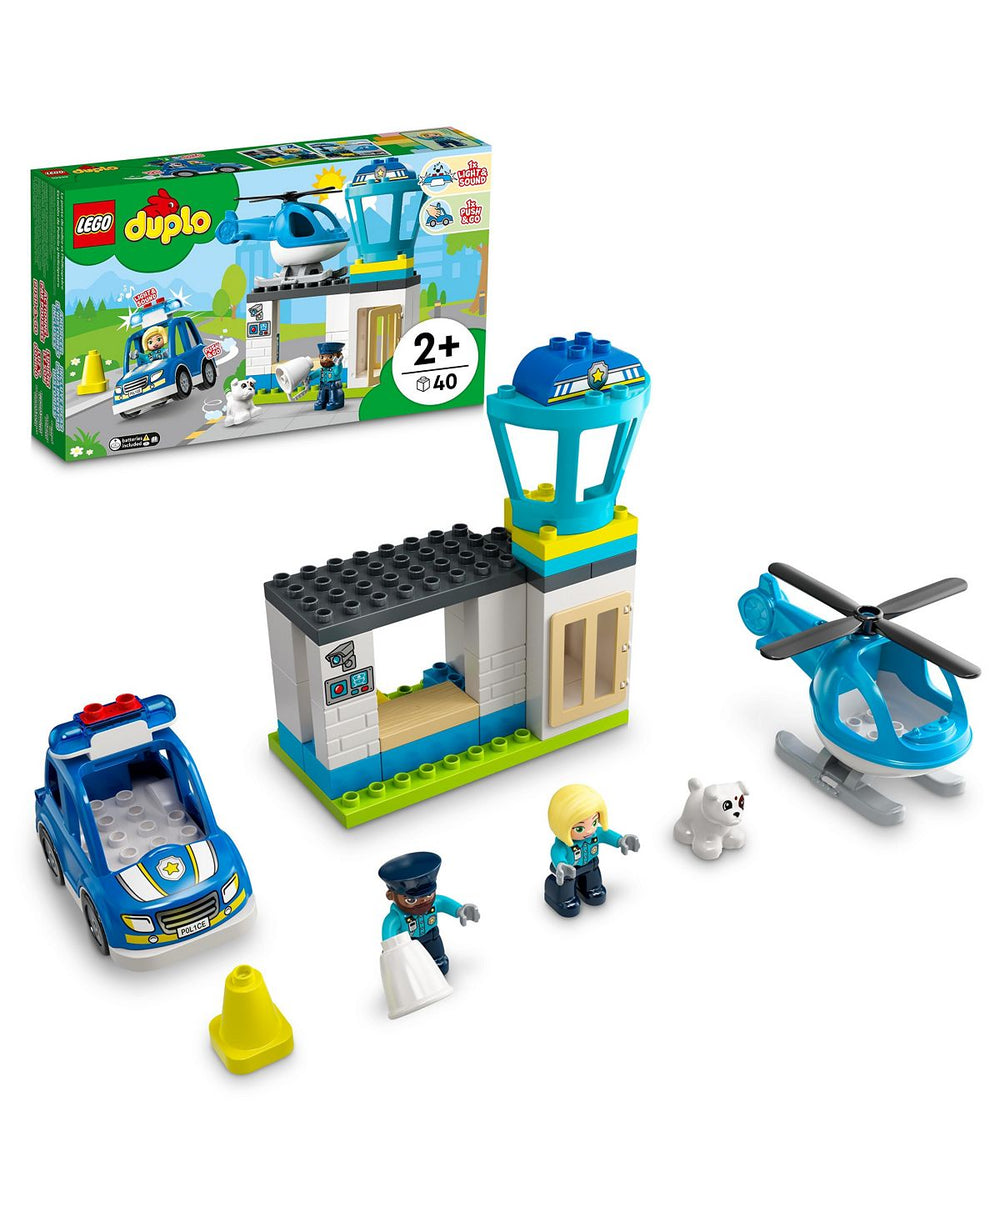 LEGO DUPLO Rescue Police Station & Helicopter 10959 - 40 Piece Building Set